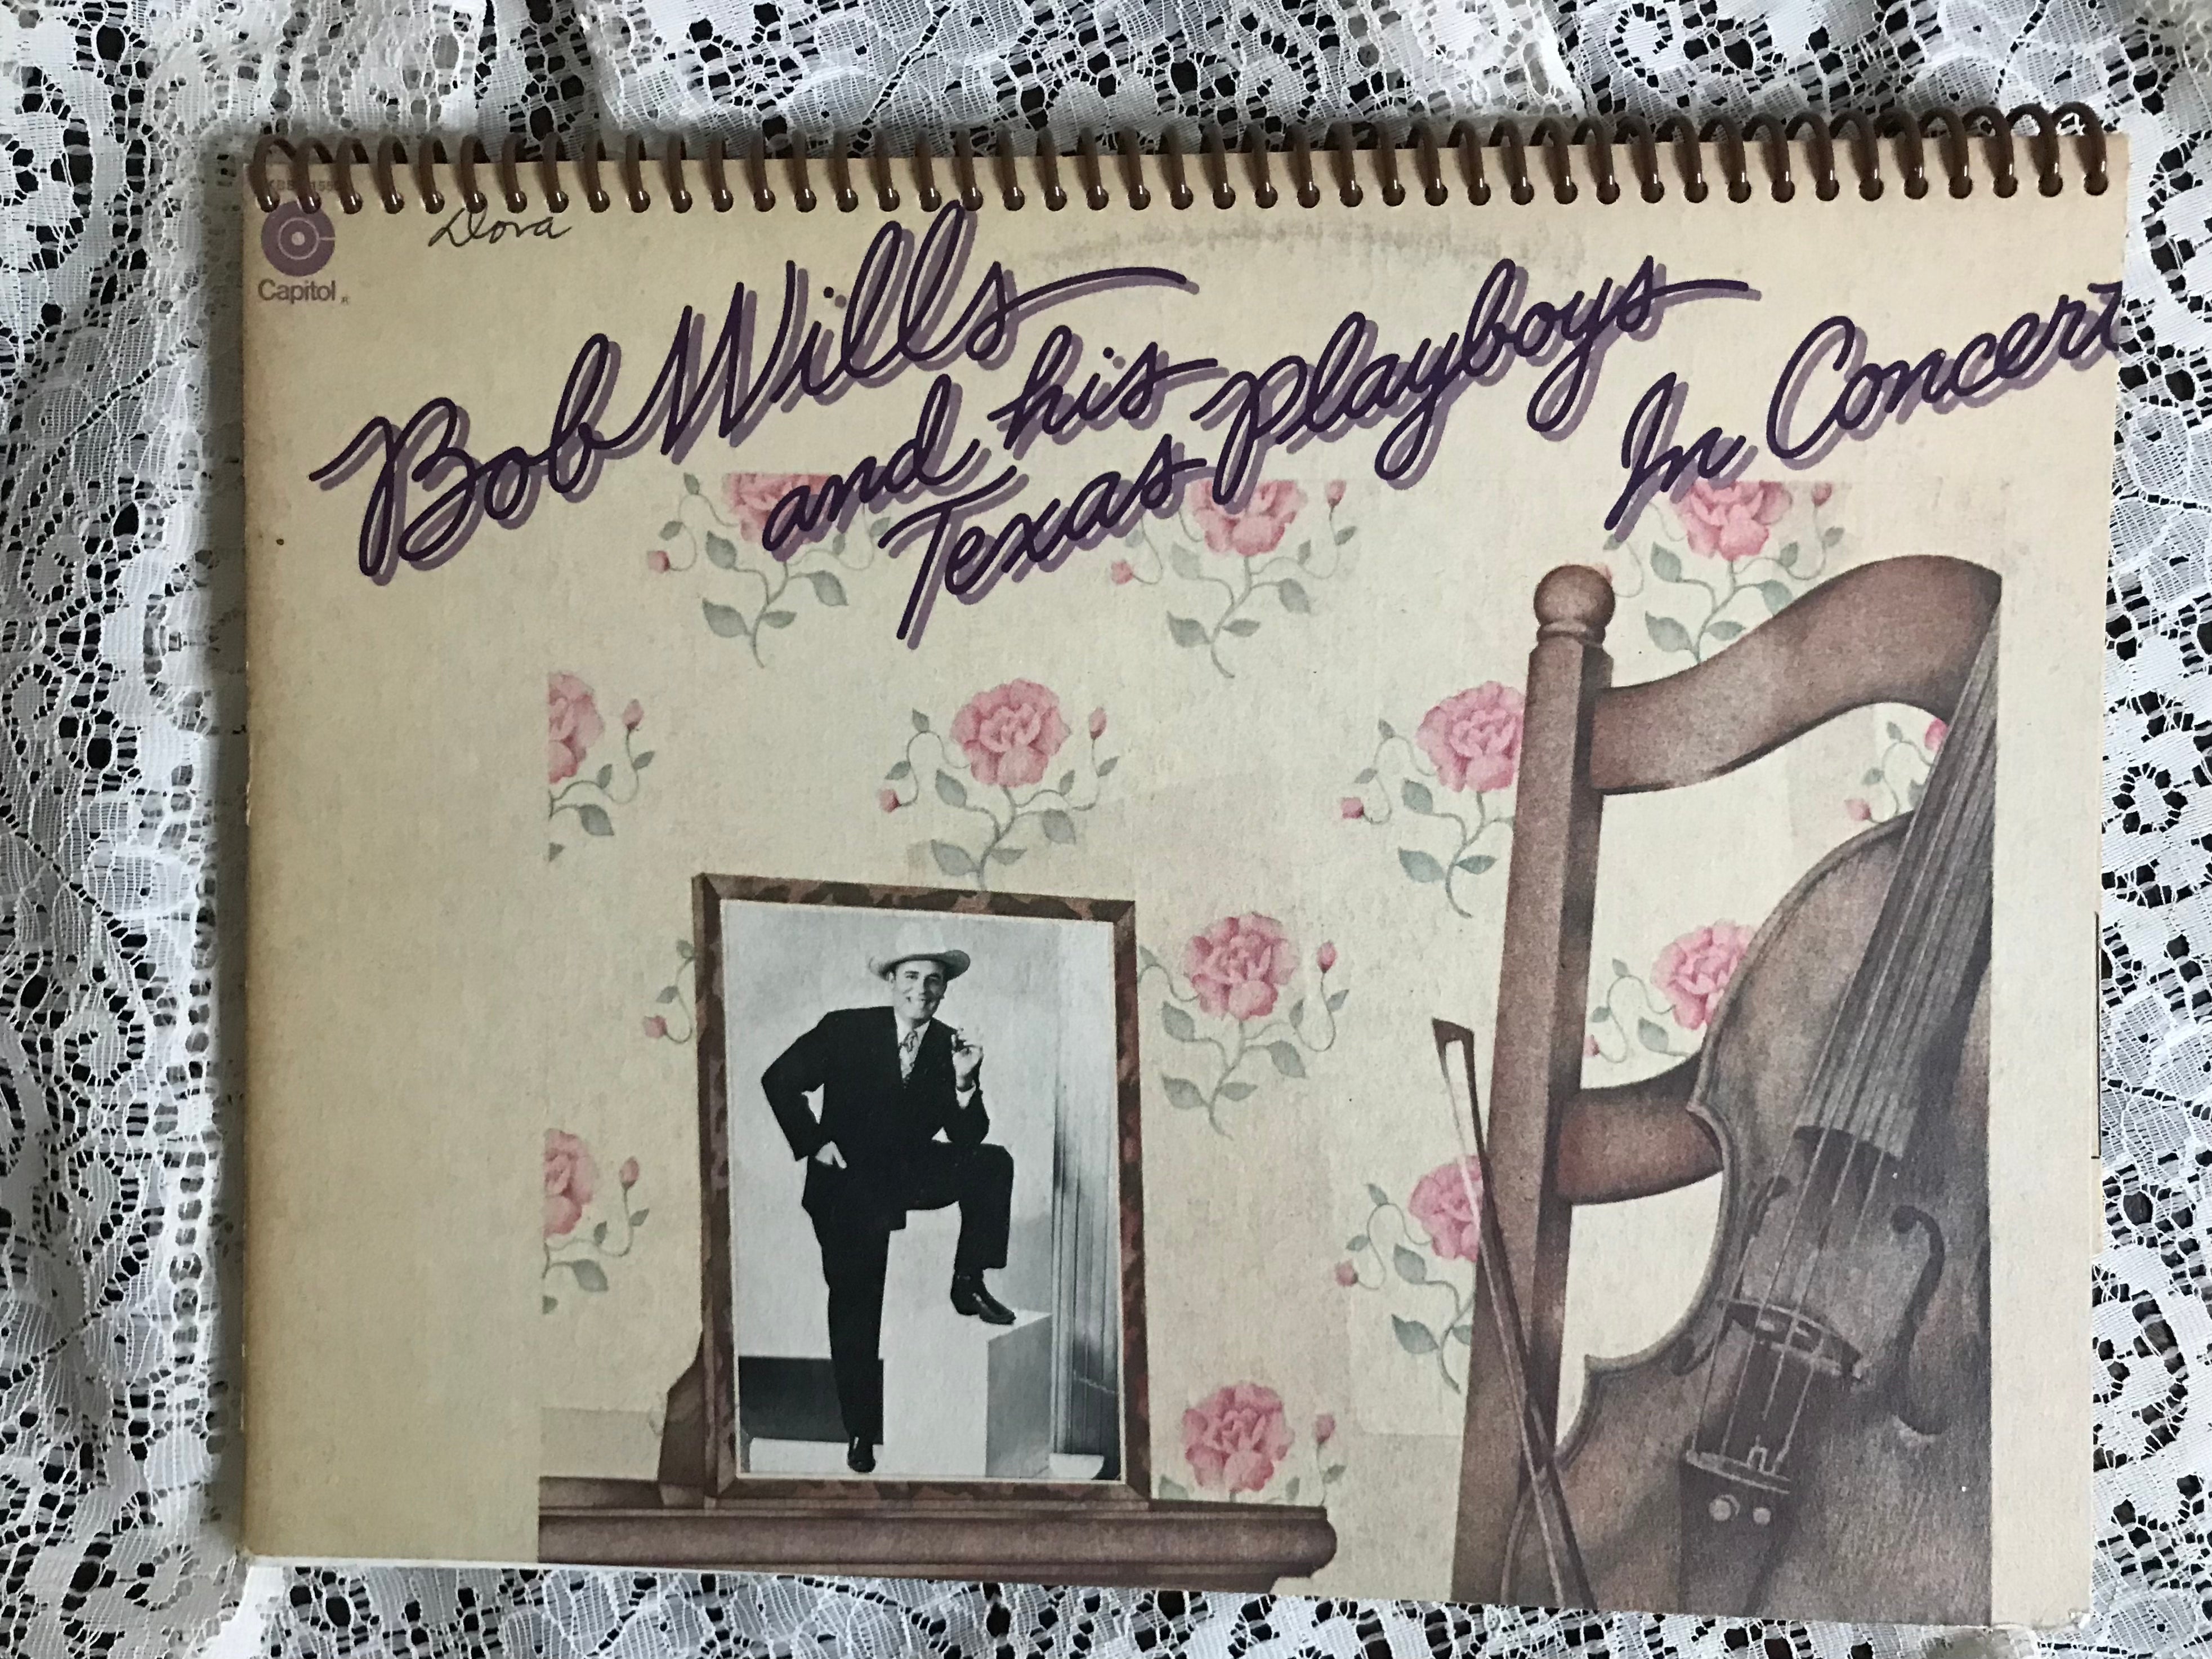 Bob Wills and the Texas Playboys Album Cover Notebook